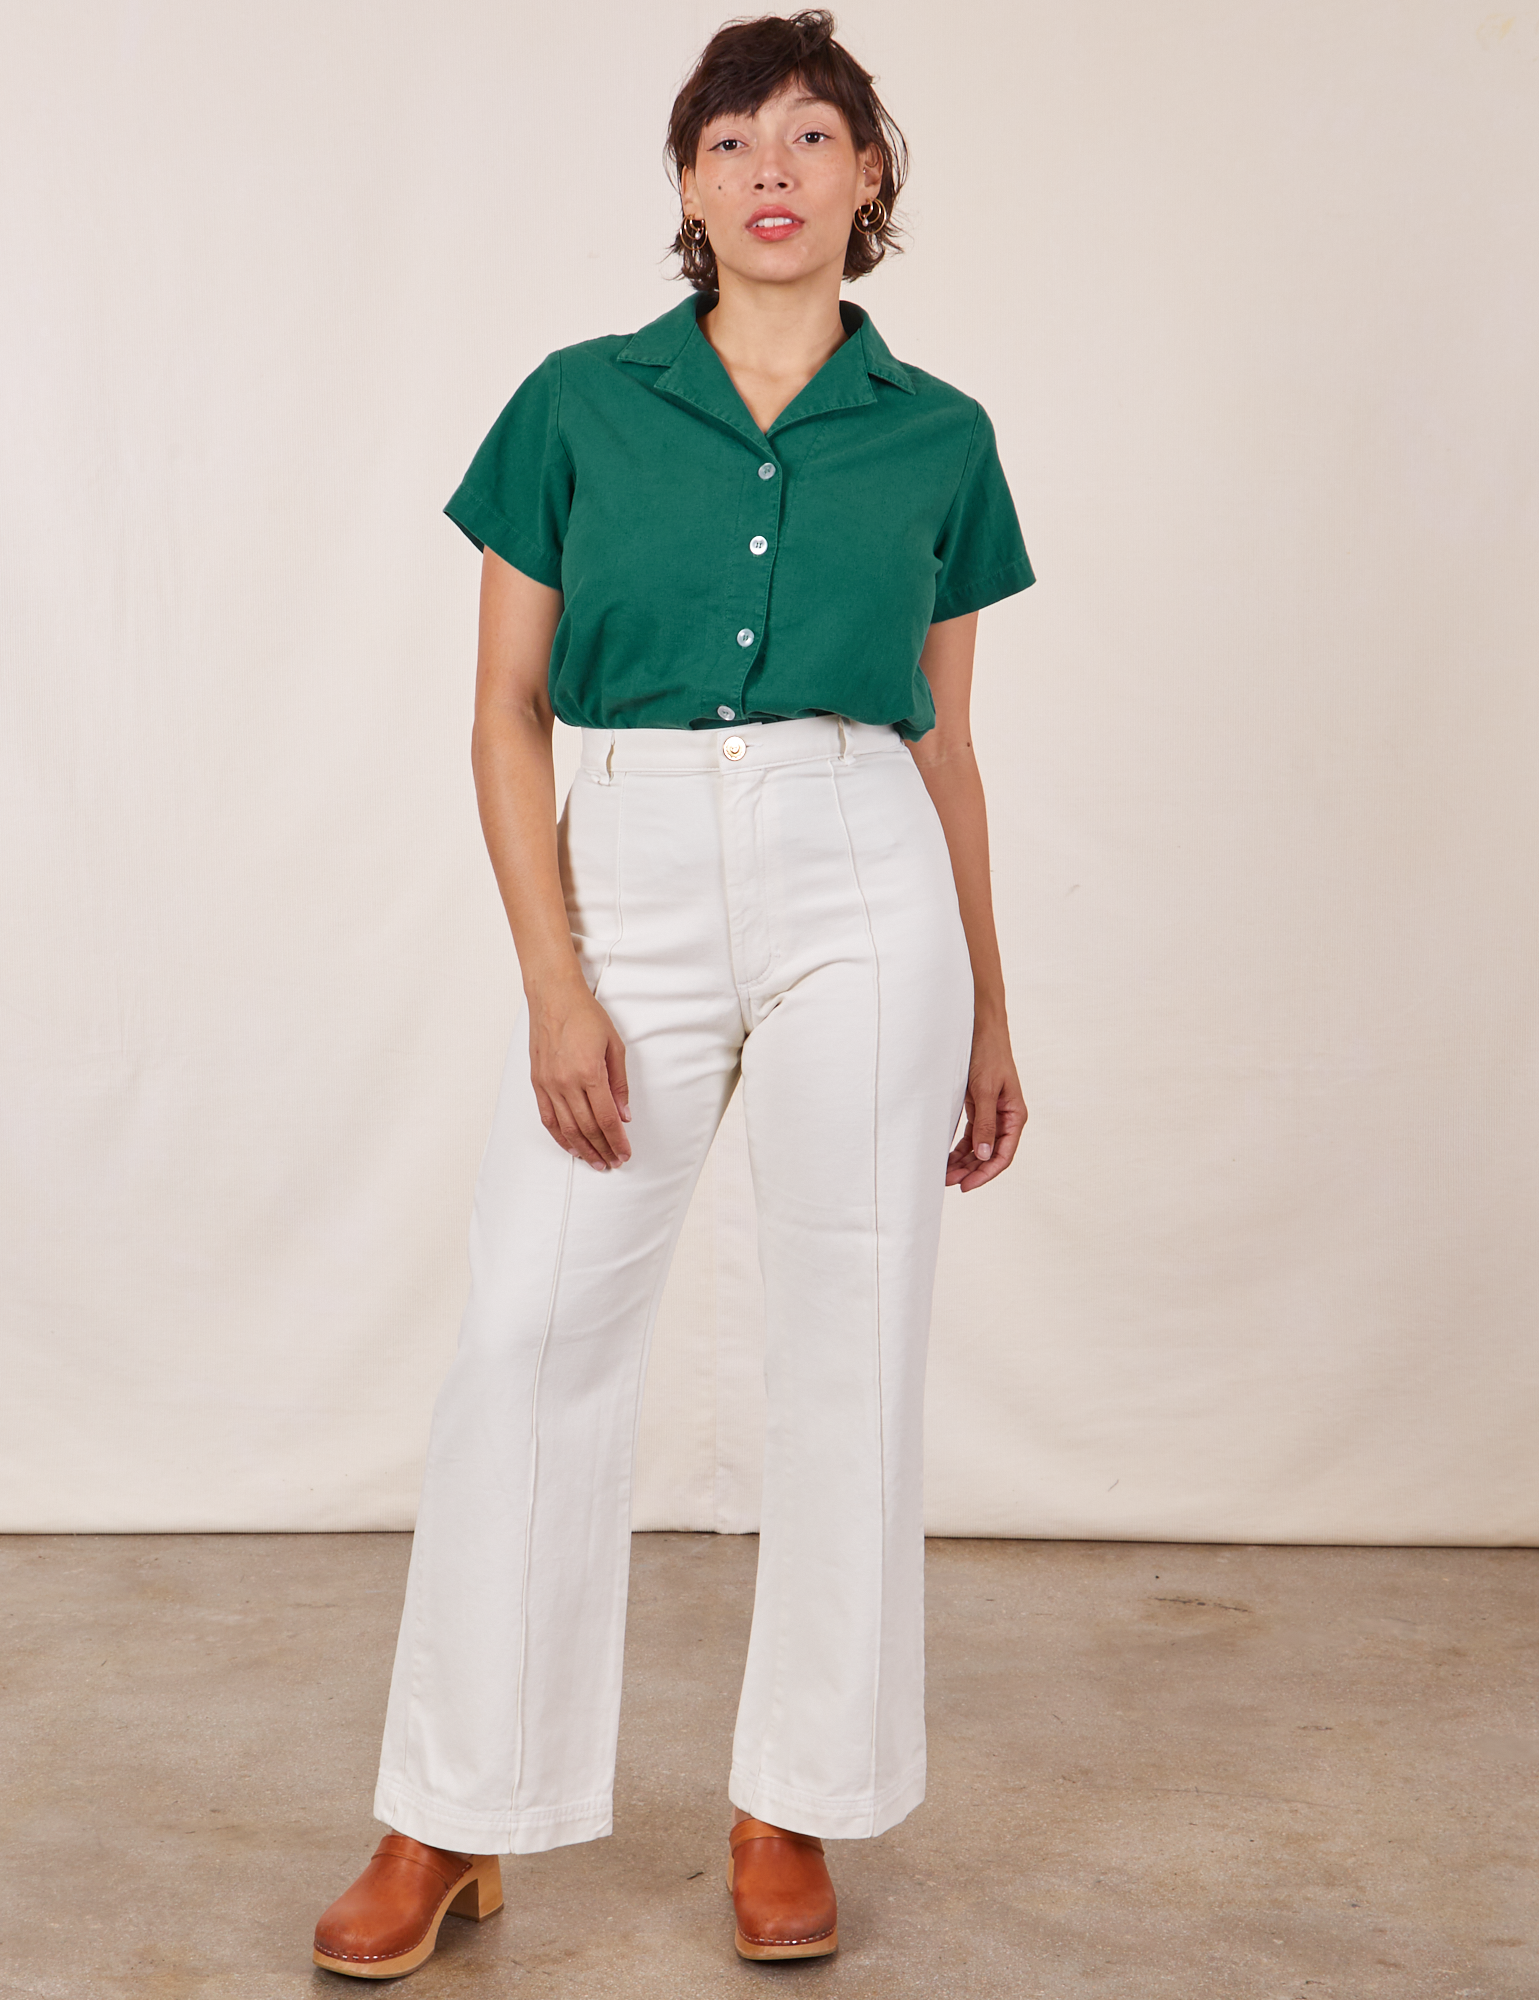 Tiara is wearing Pantry Button-Up in Hunter Green and vintage off-white Western Pants